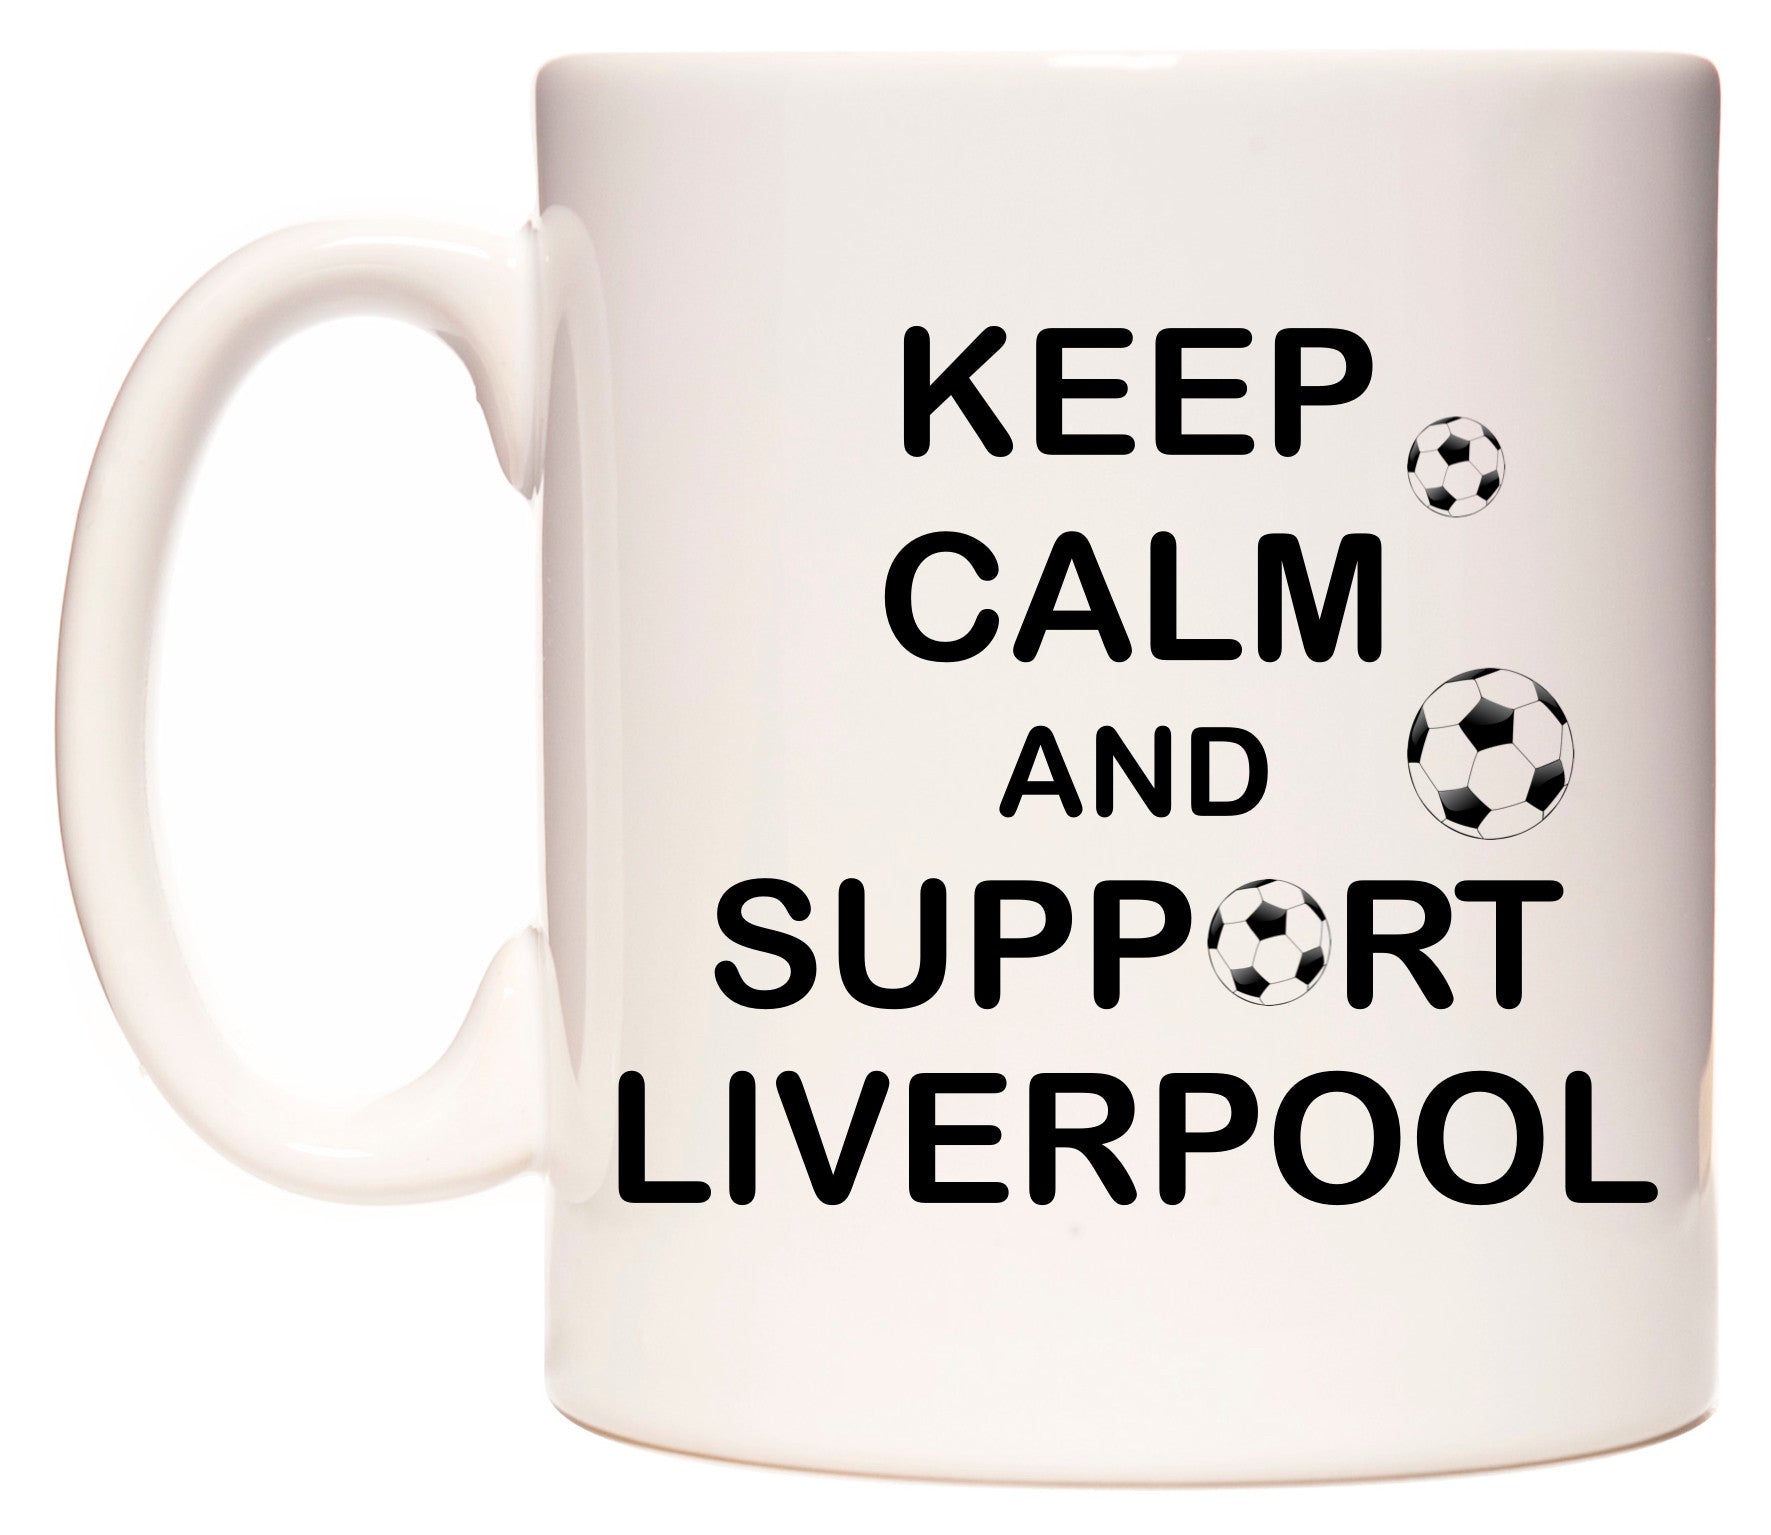 This mug features Keep Calm And Support Liverpool